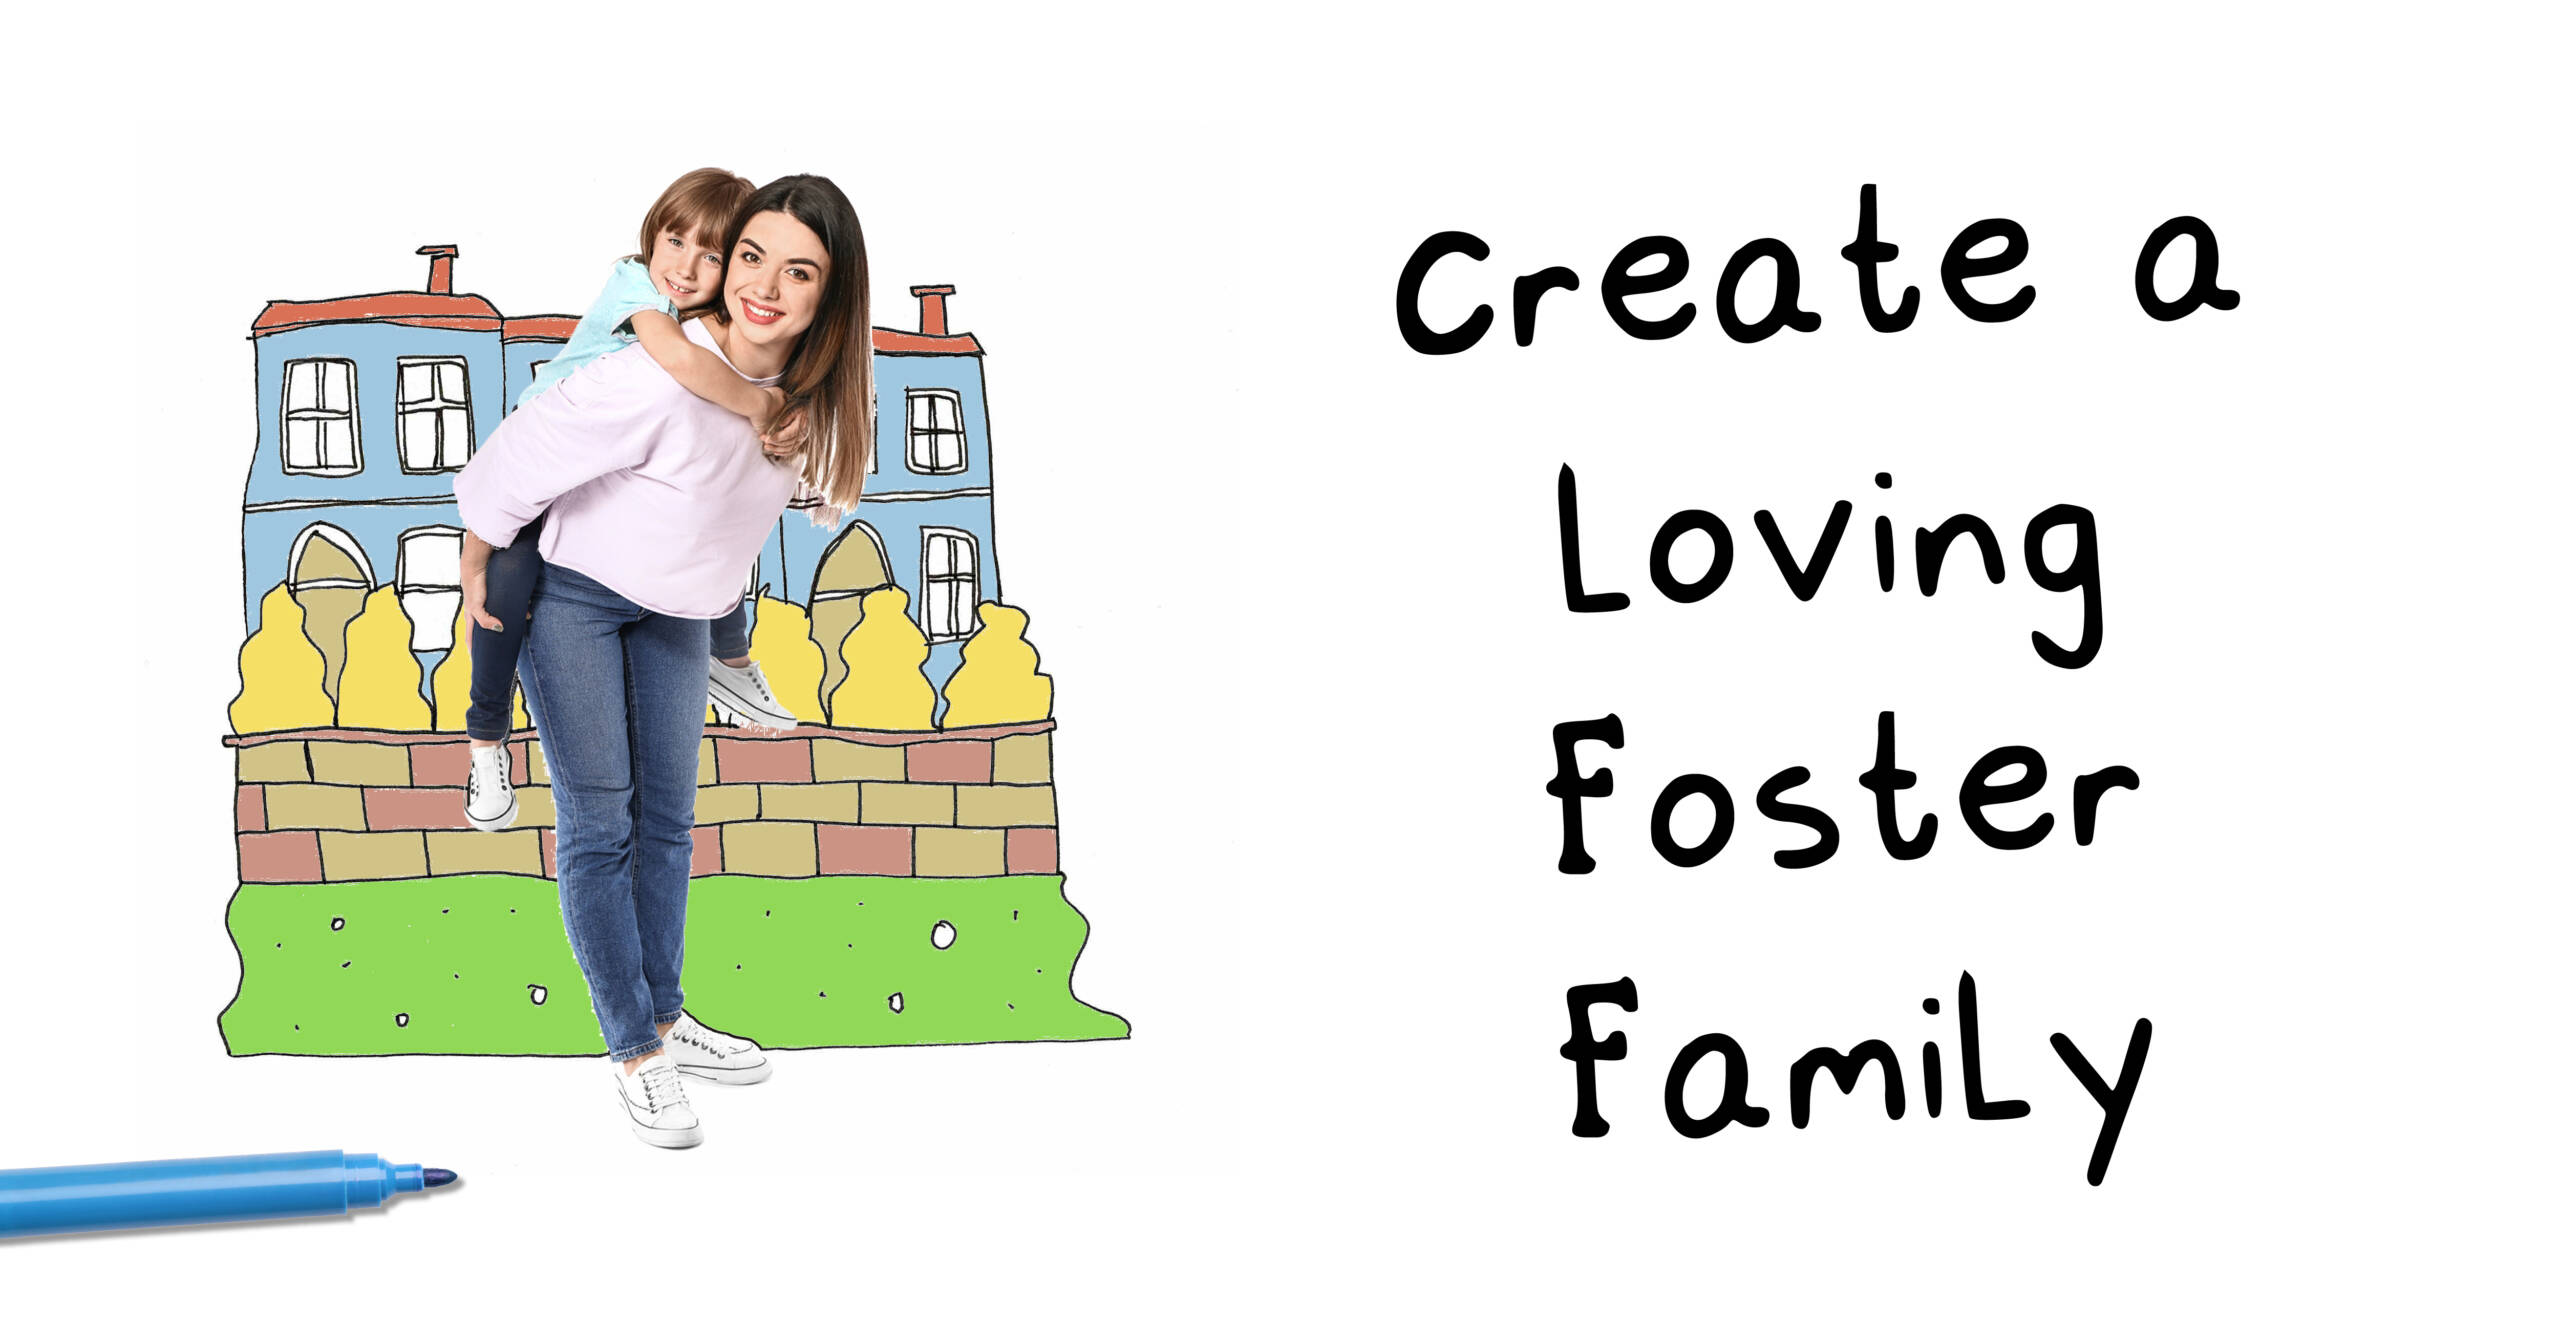 Campaign image - Create a loving foster family text